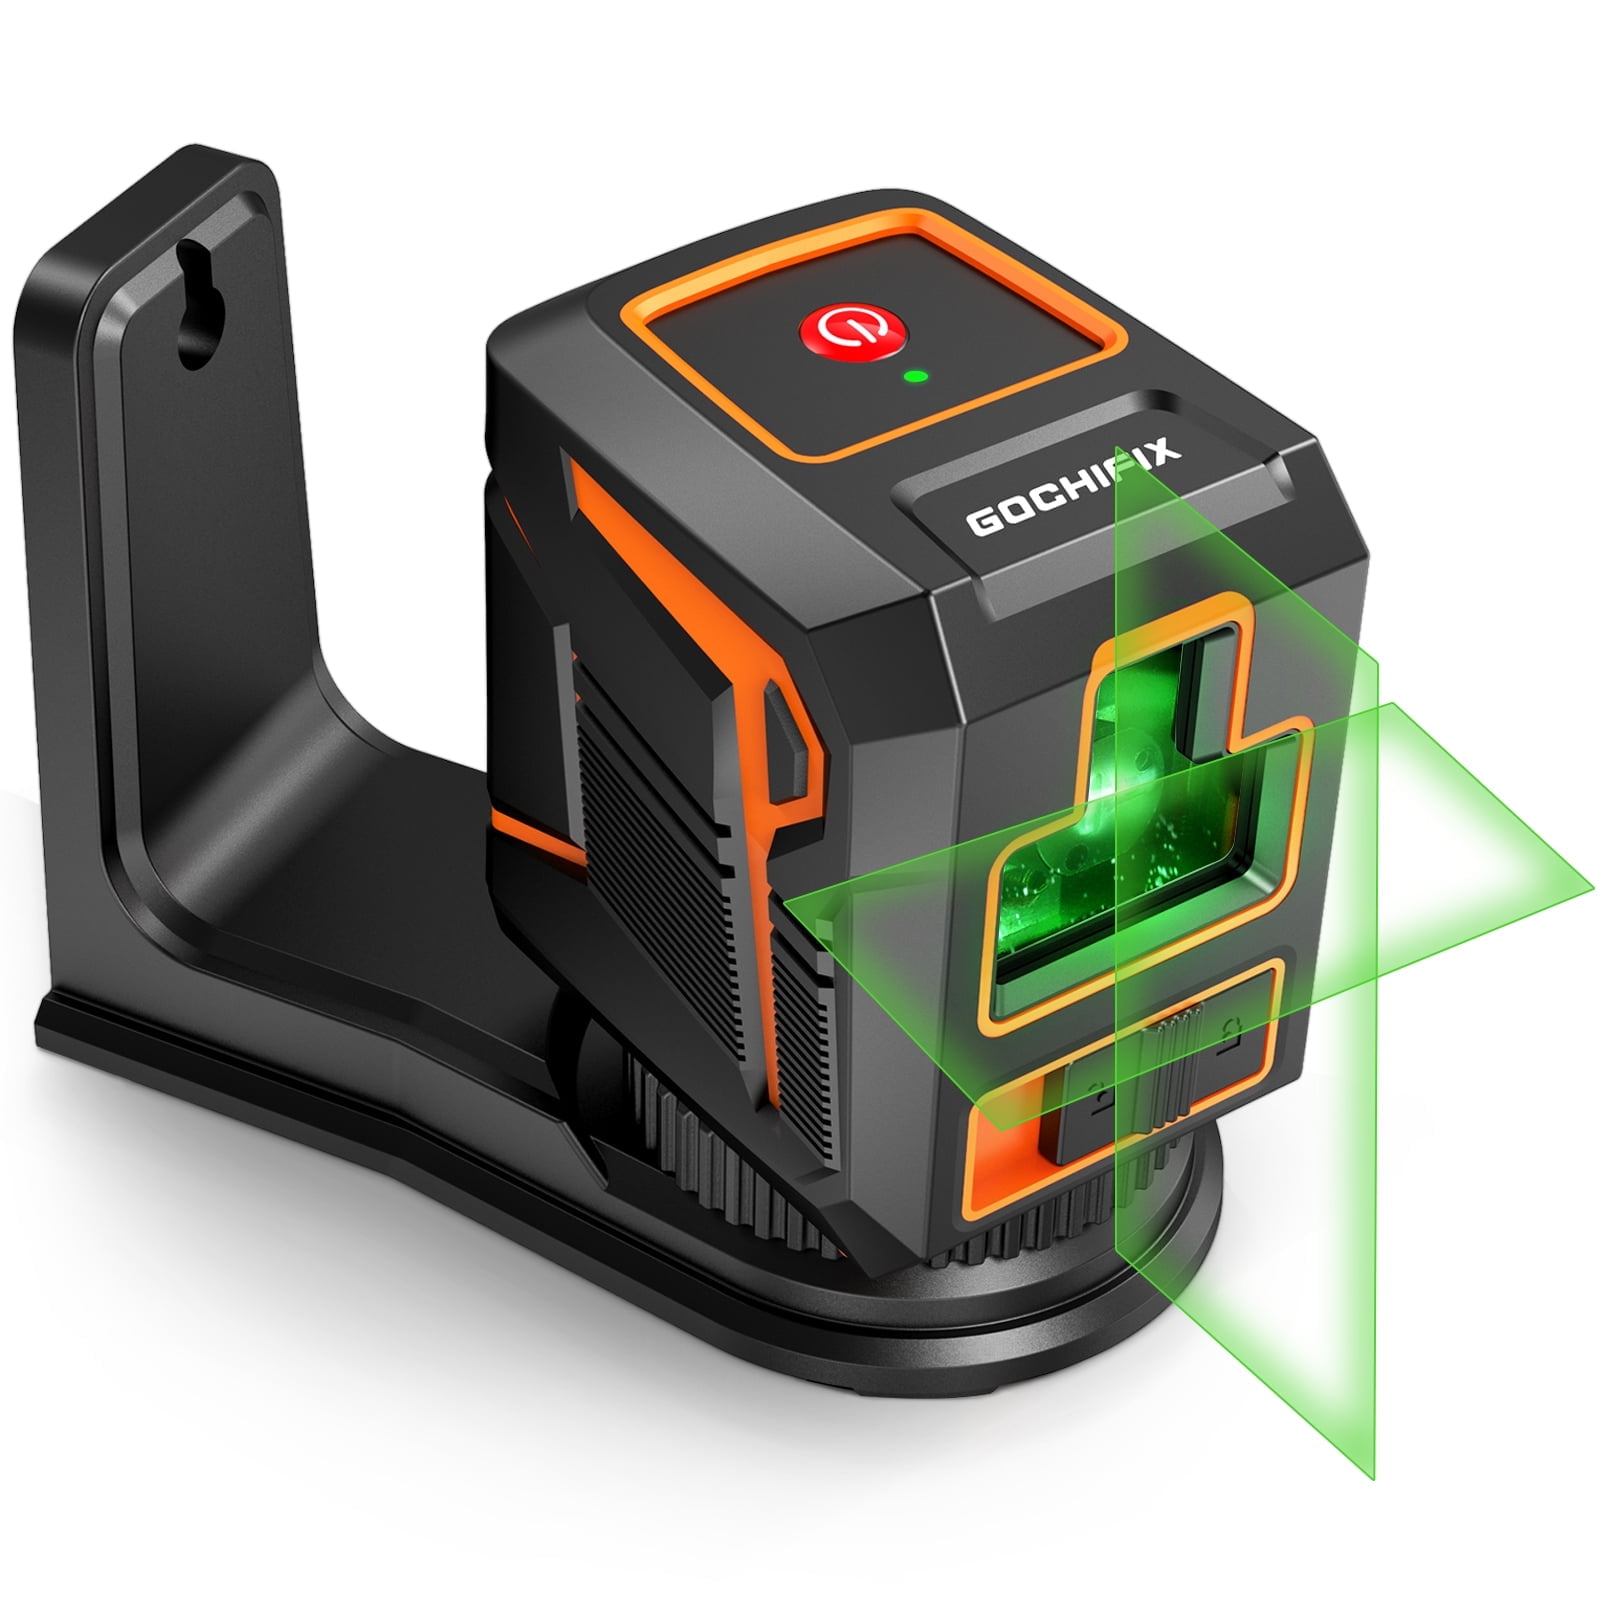 Laser Level GOCHIFIX Self Leveling Cross Line Laser Level 100ft Green Cross  Laser Level with Manual Mode for Picture Hanging and Construction 